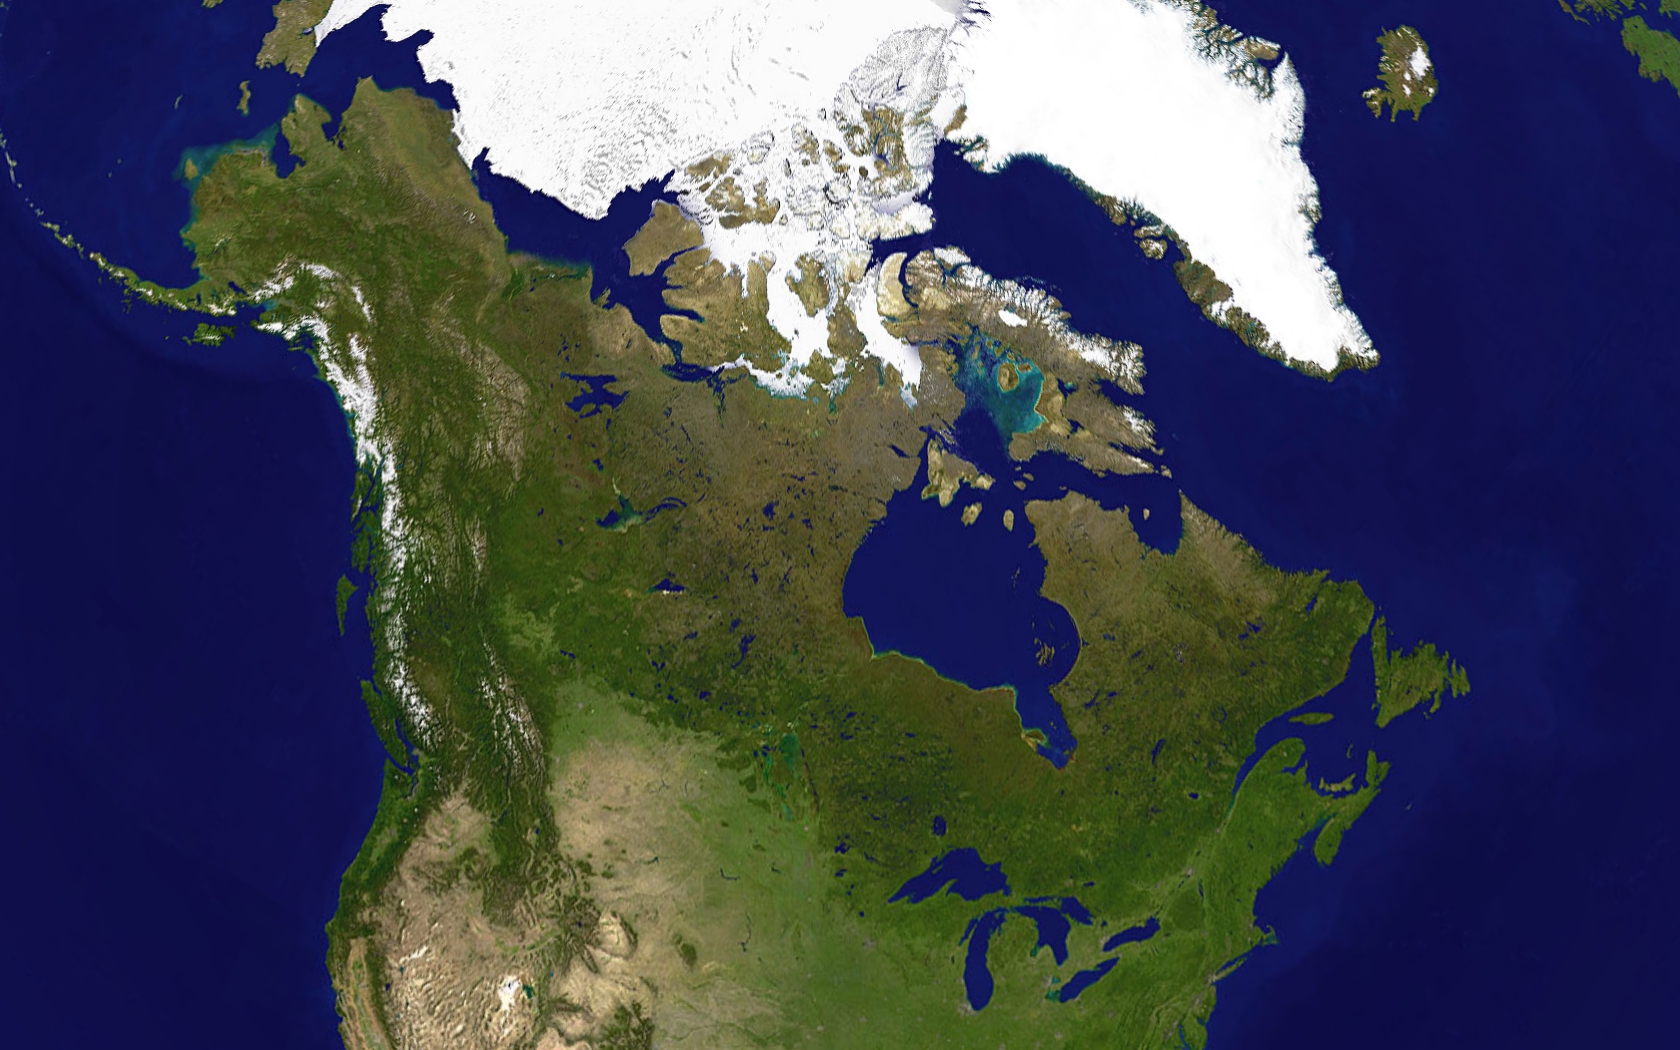 A satellite composite image containing all of Canada and part of the United States. Boreal forests prevail on the rocky Canadian Shield, while ice and ...